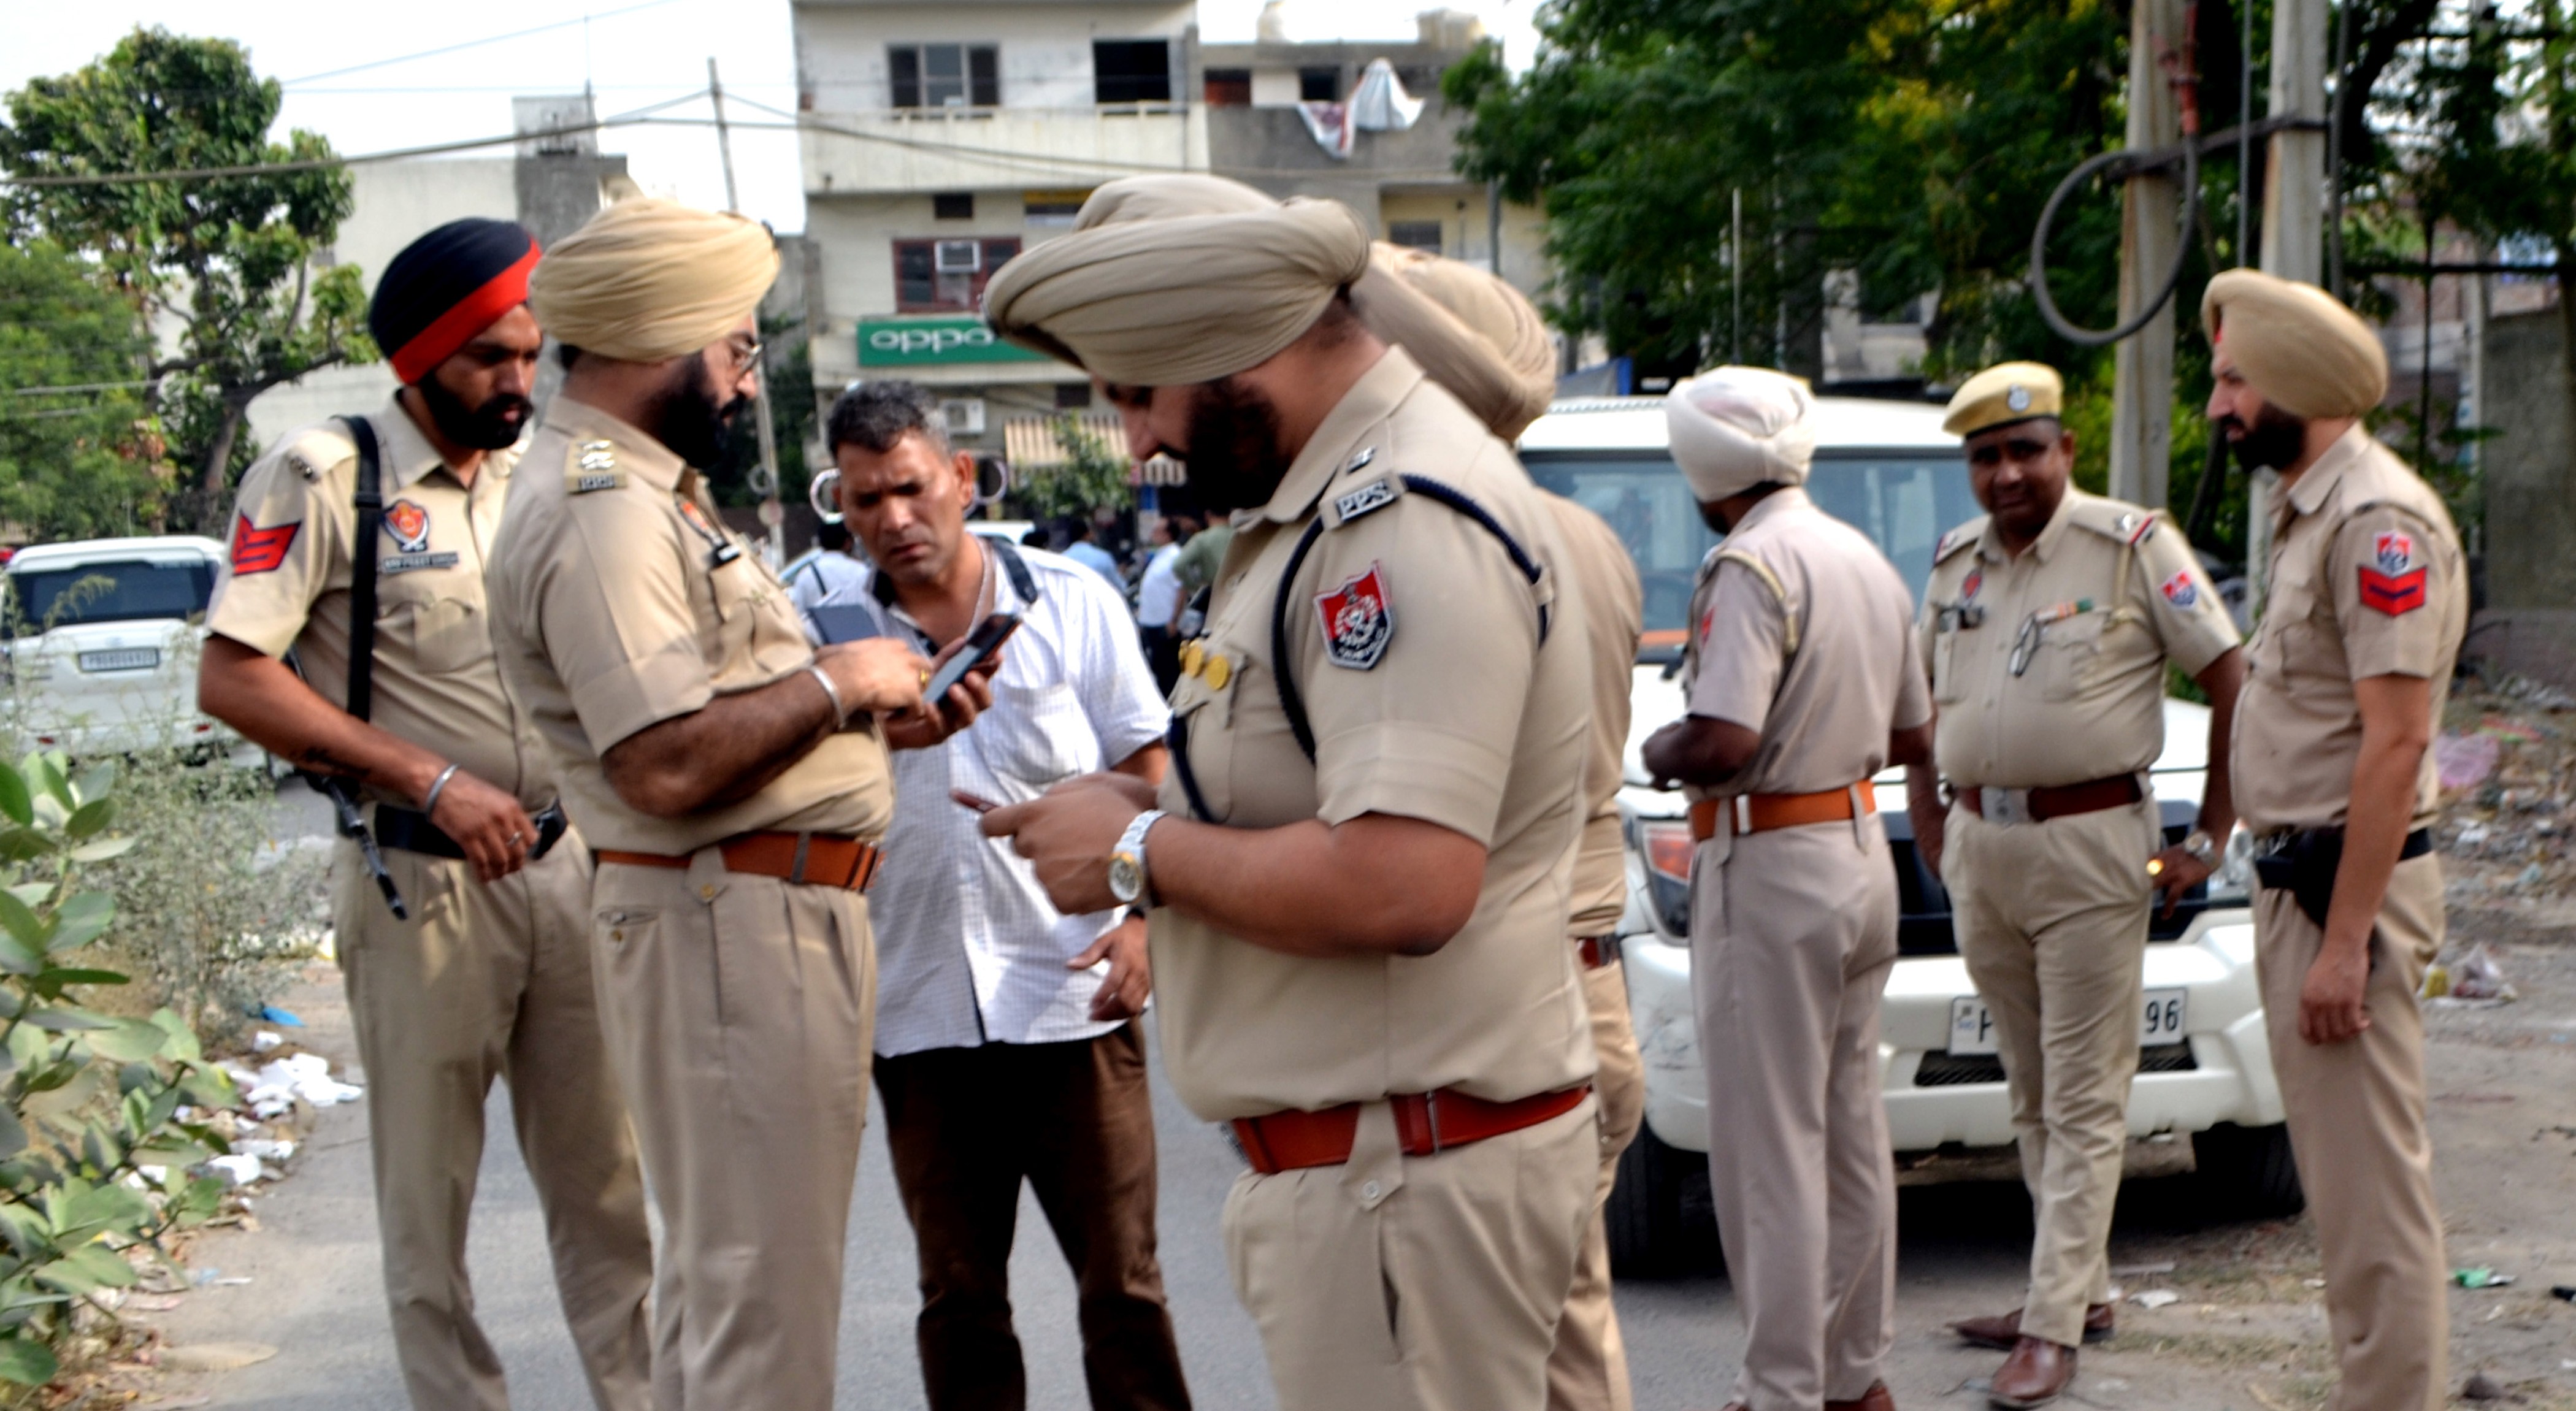 Carjackers spray something in driver's eyes, flee with car in Amritsar